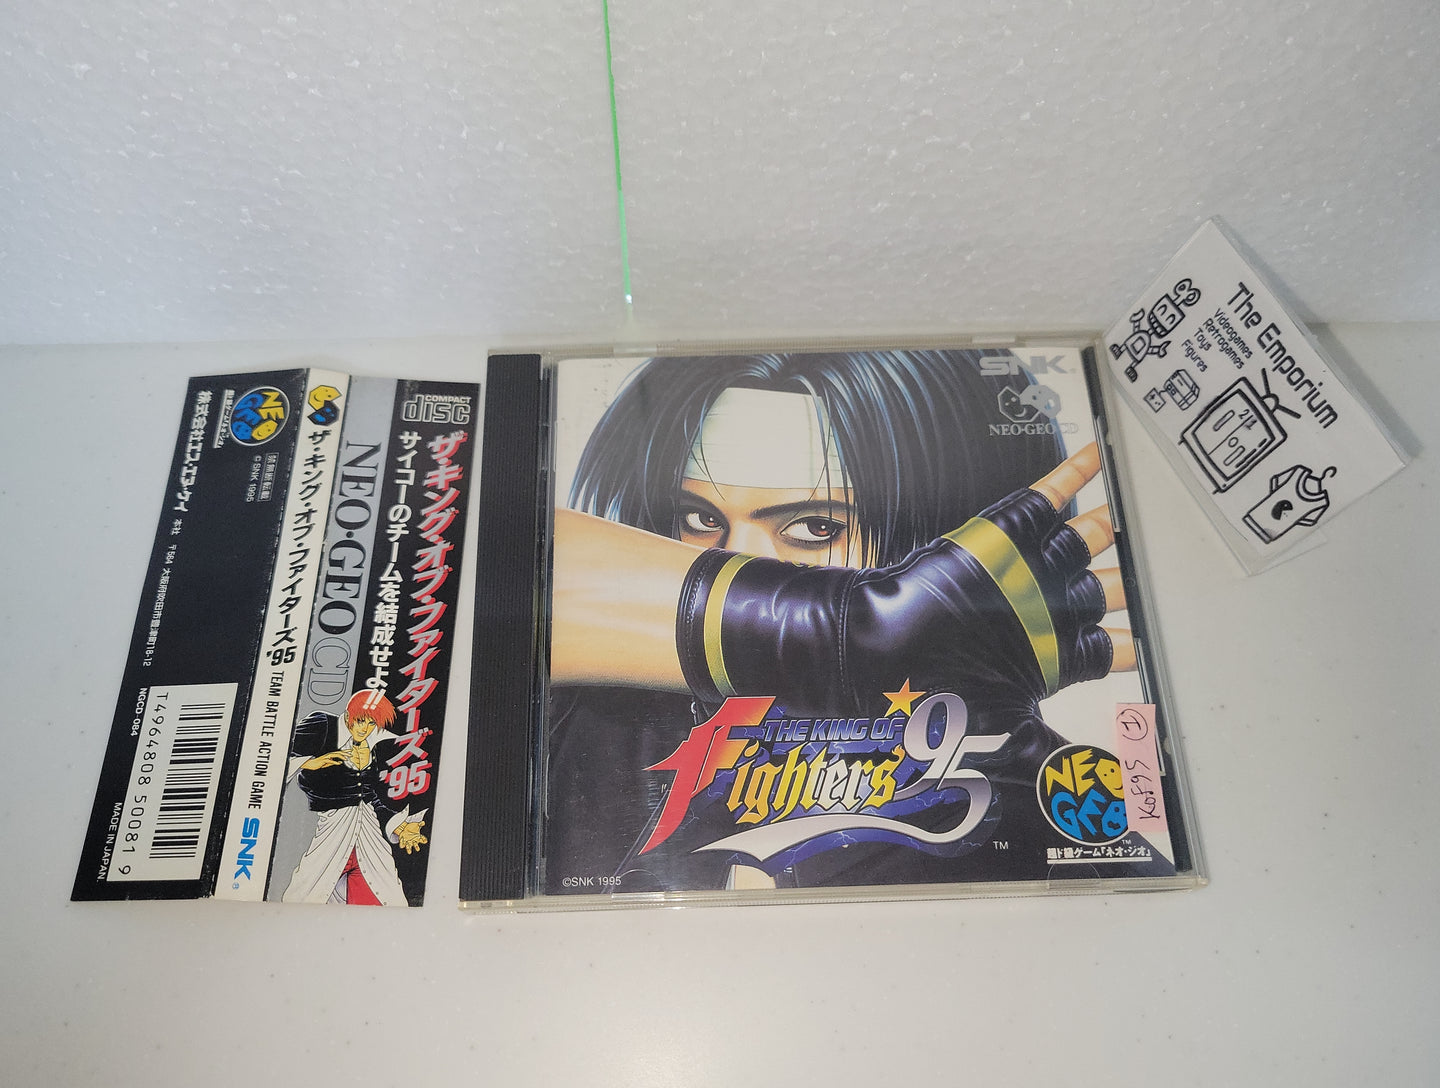 The King of fighters 95 - Snk Neogeo cd ngcd